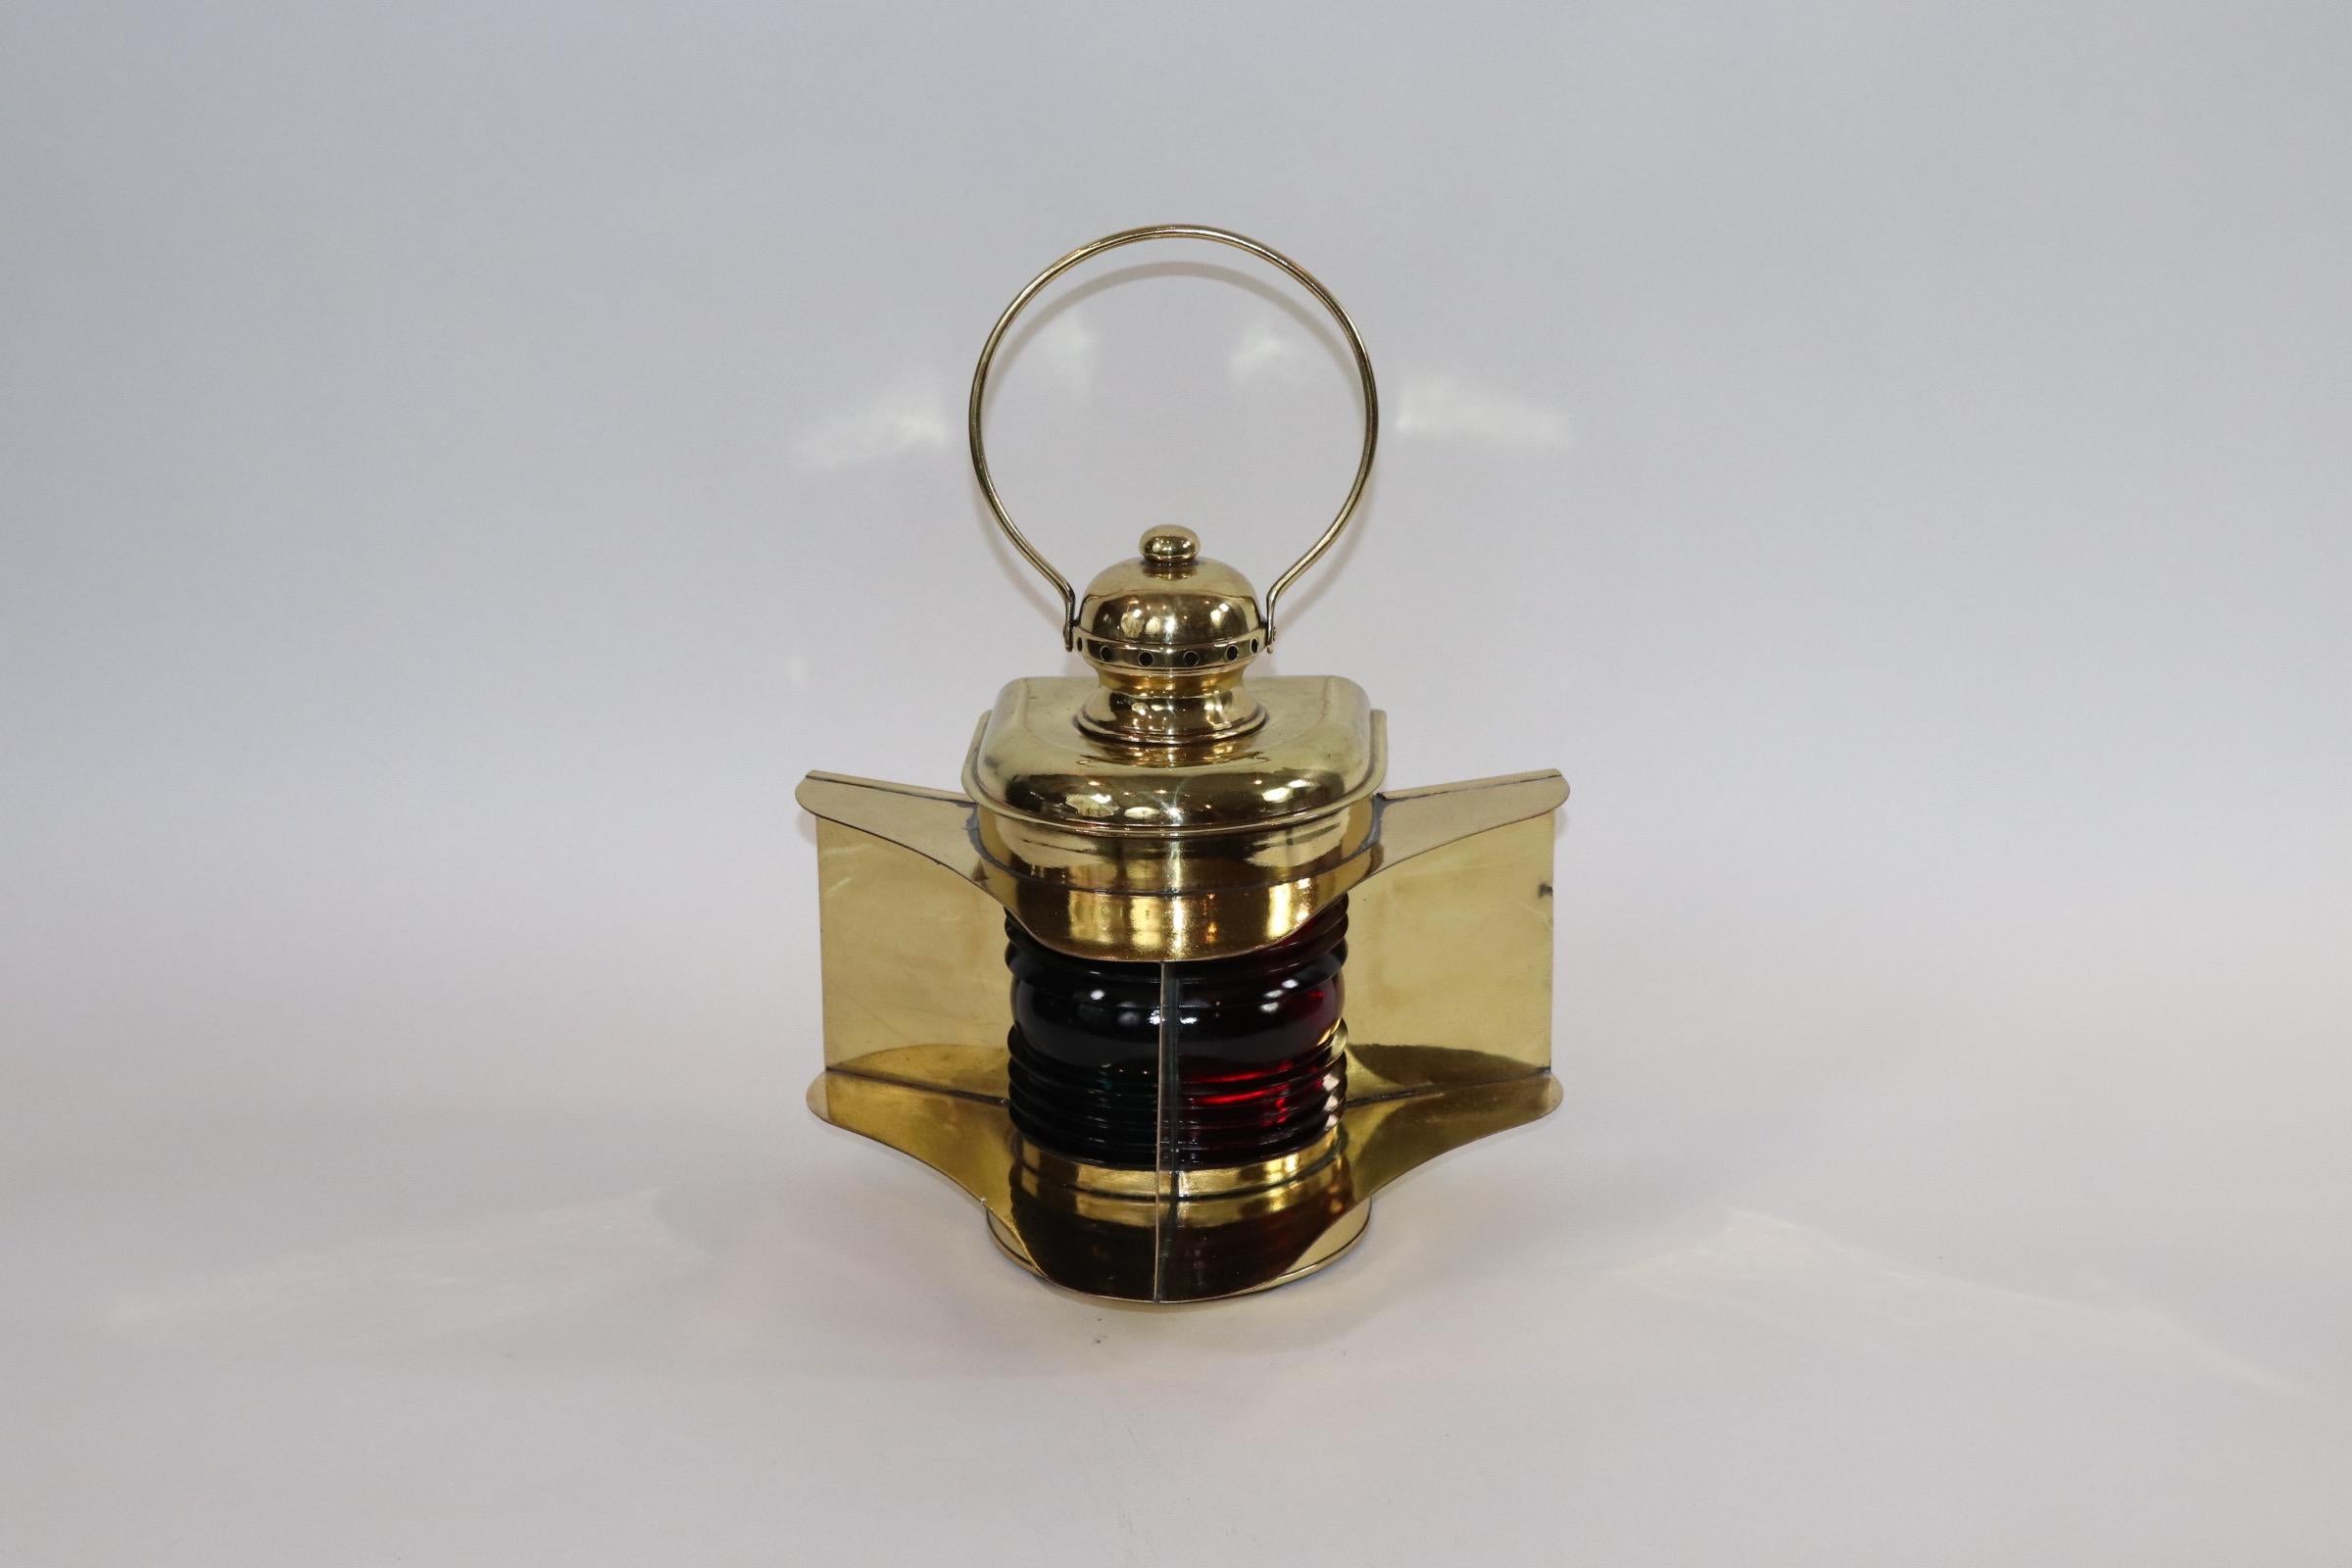 Quality ships bow lantern with red and green Fresnel glass lenses. Hinged door reads 